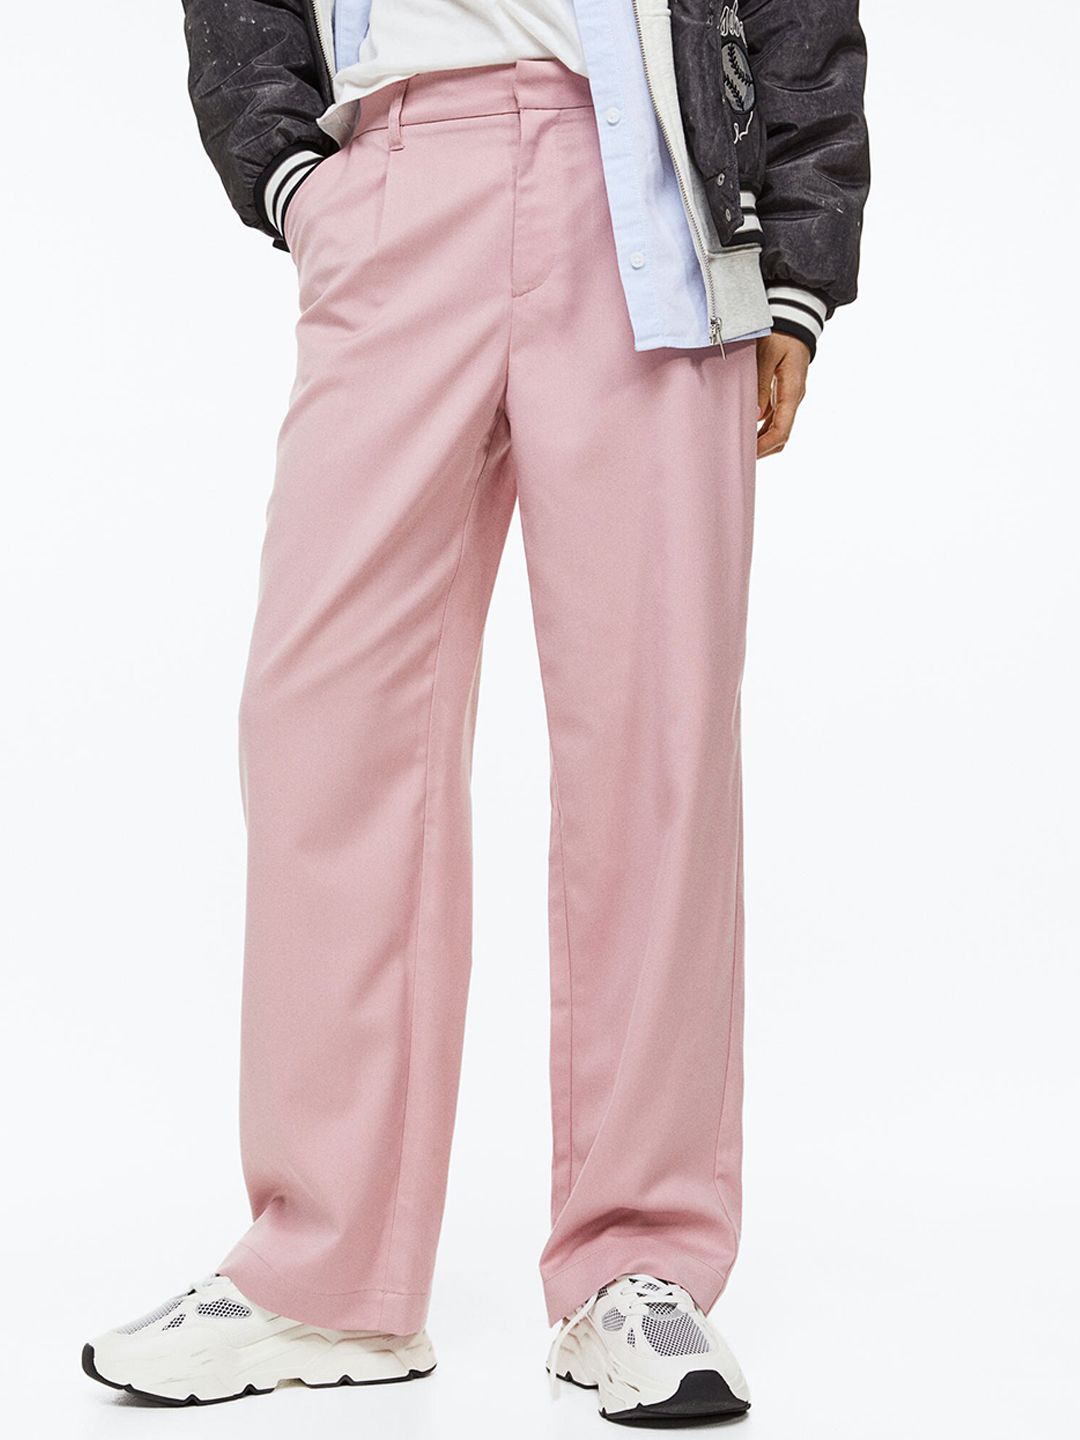 H&M Women Tailored Trousers Price in India